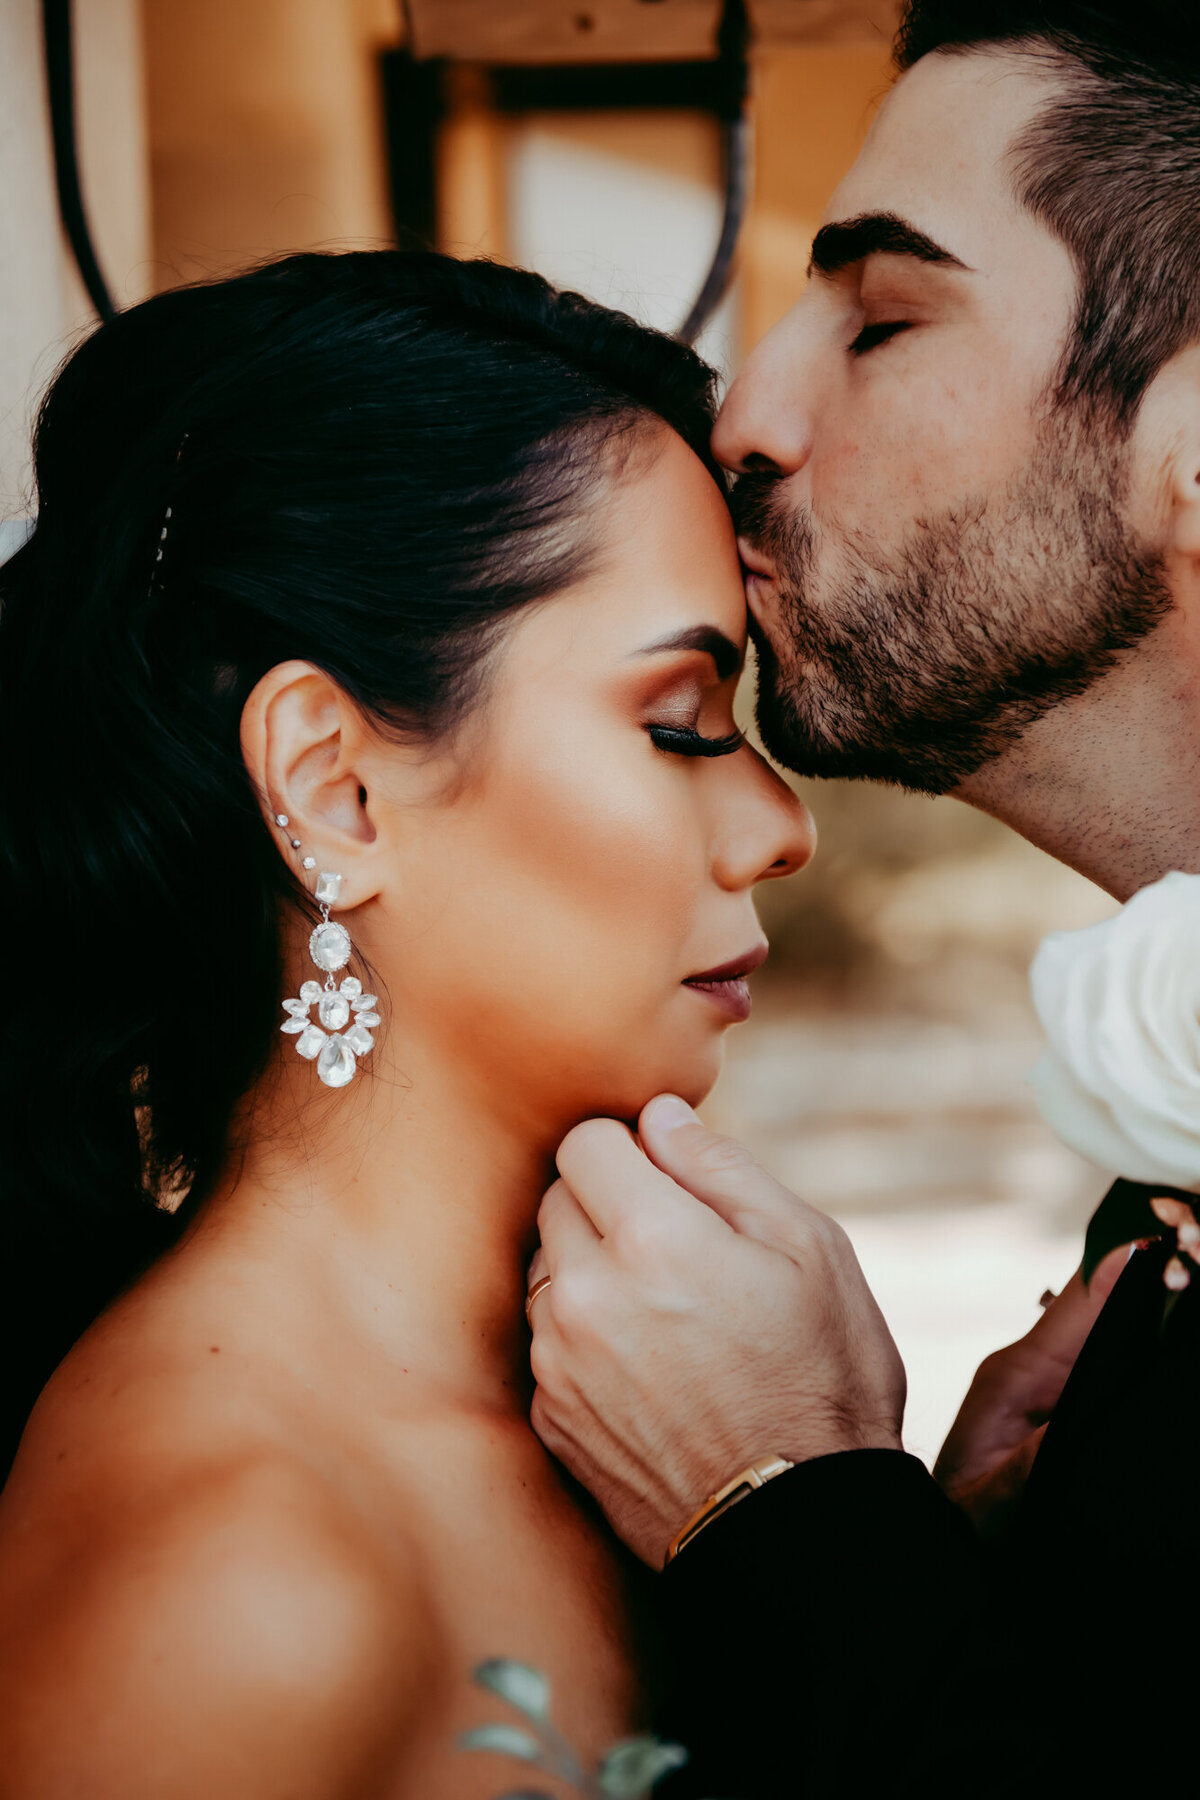 Couples Photography, a groom brings hands u to brides face tenderly and kisses her on forehead